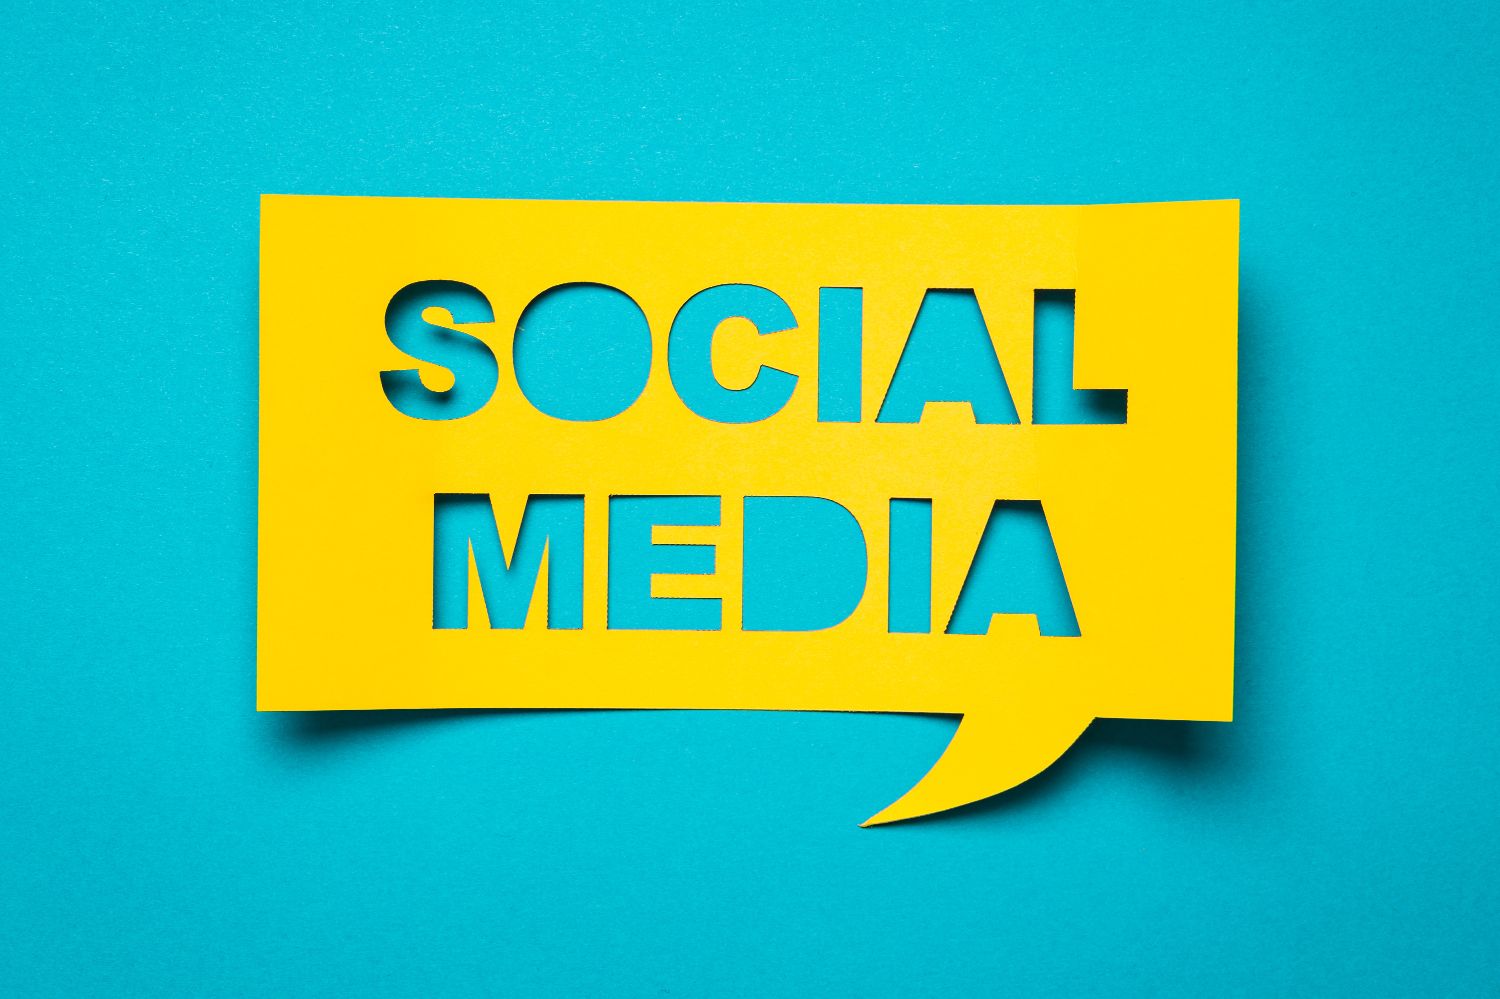 Image of a yellow speech bubble that says "Social Media" on a blue background 